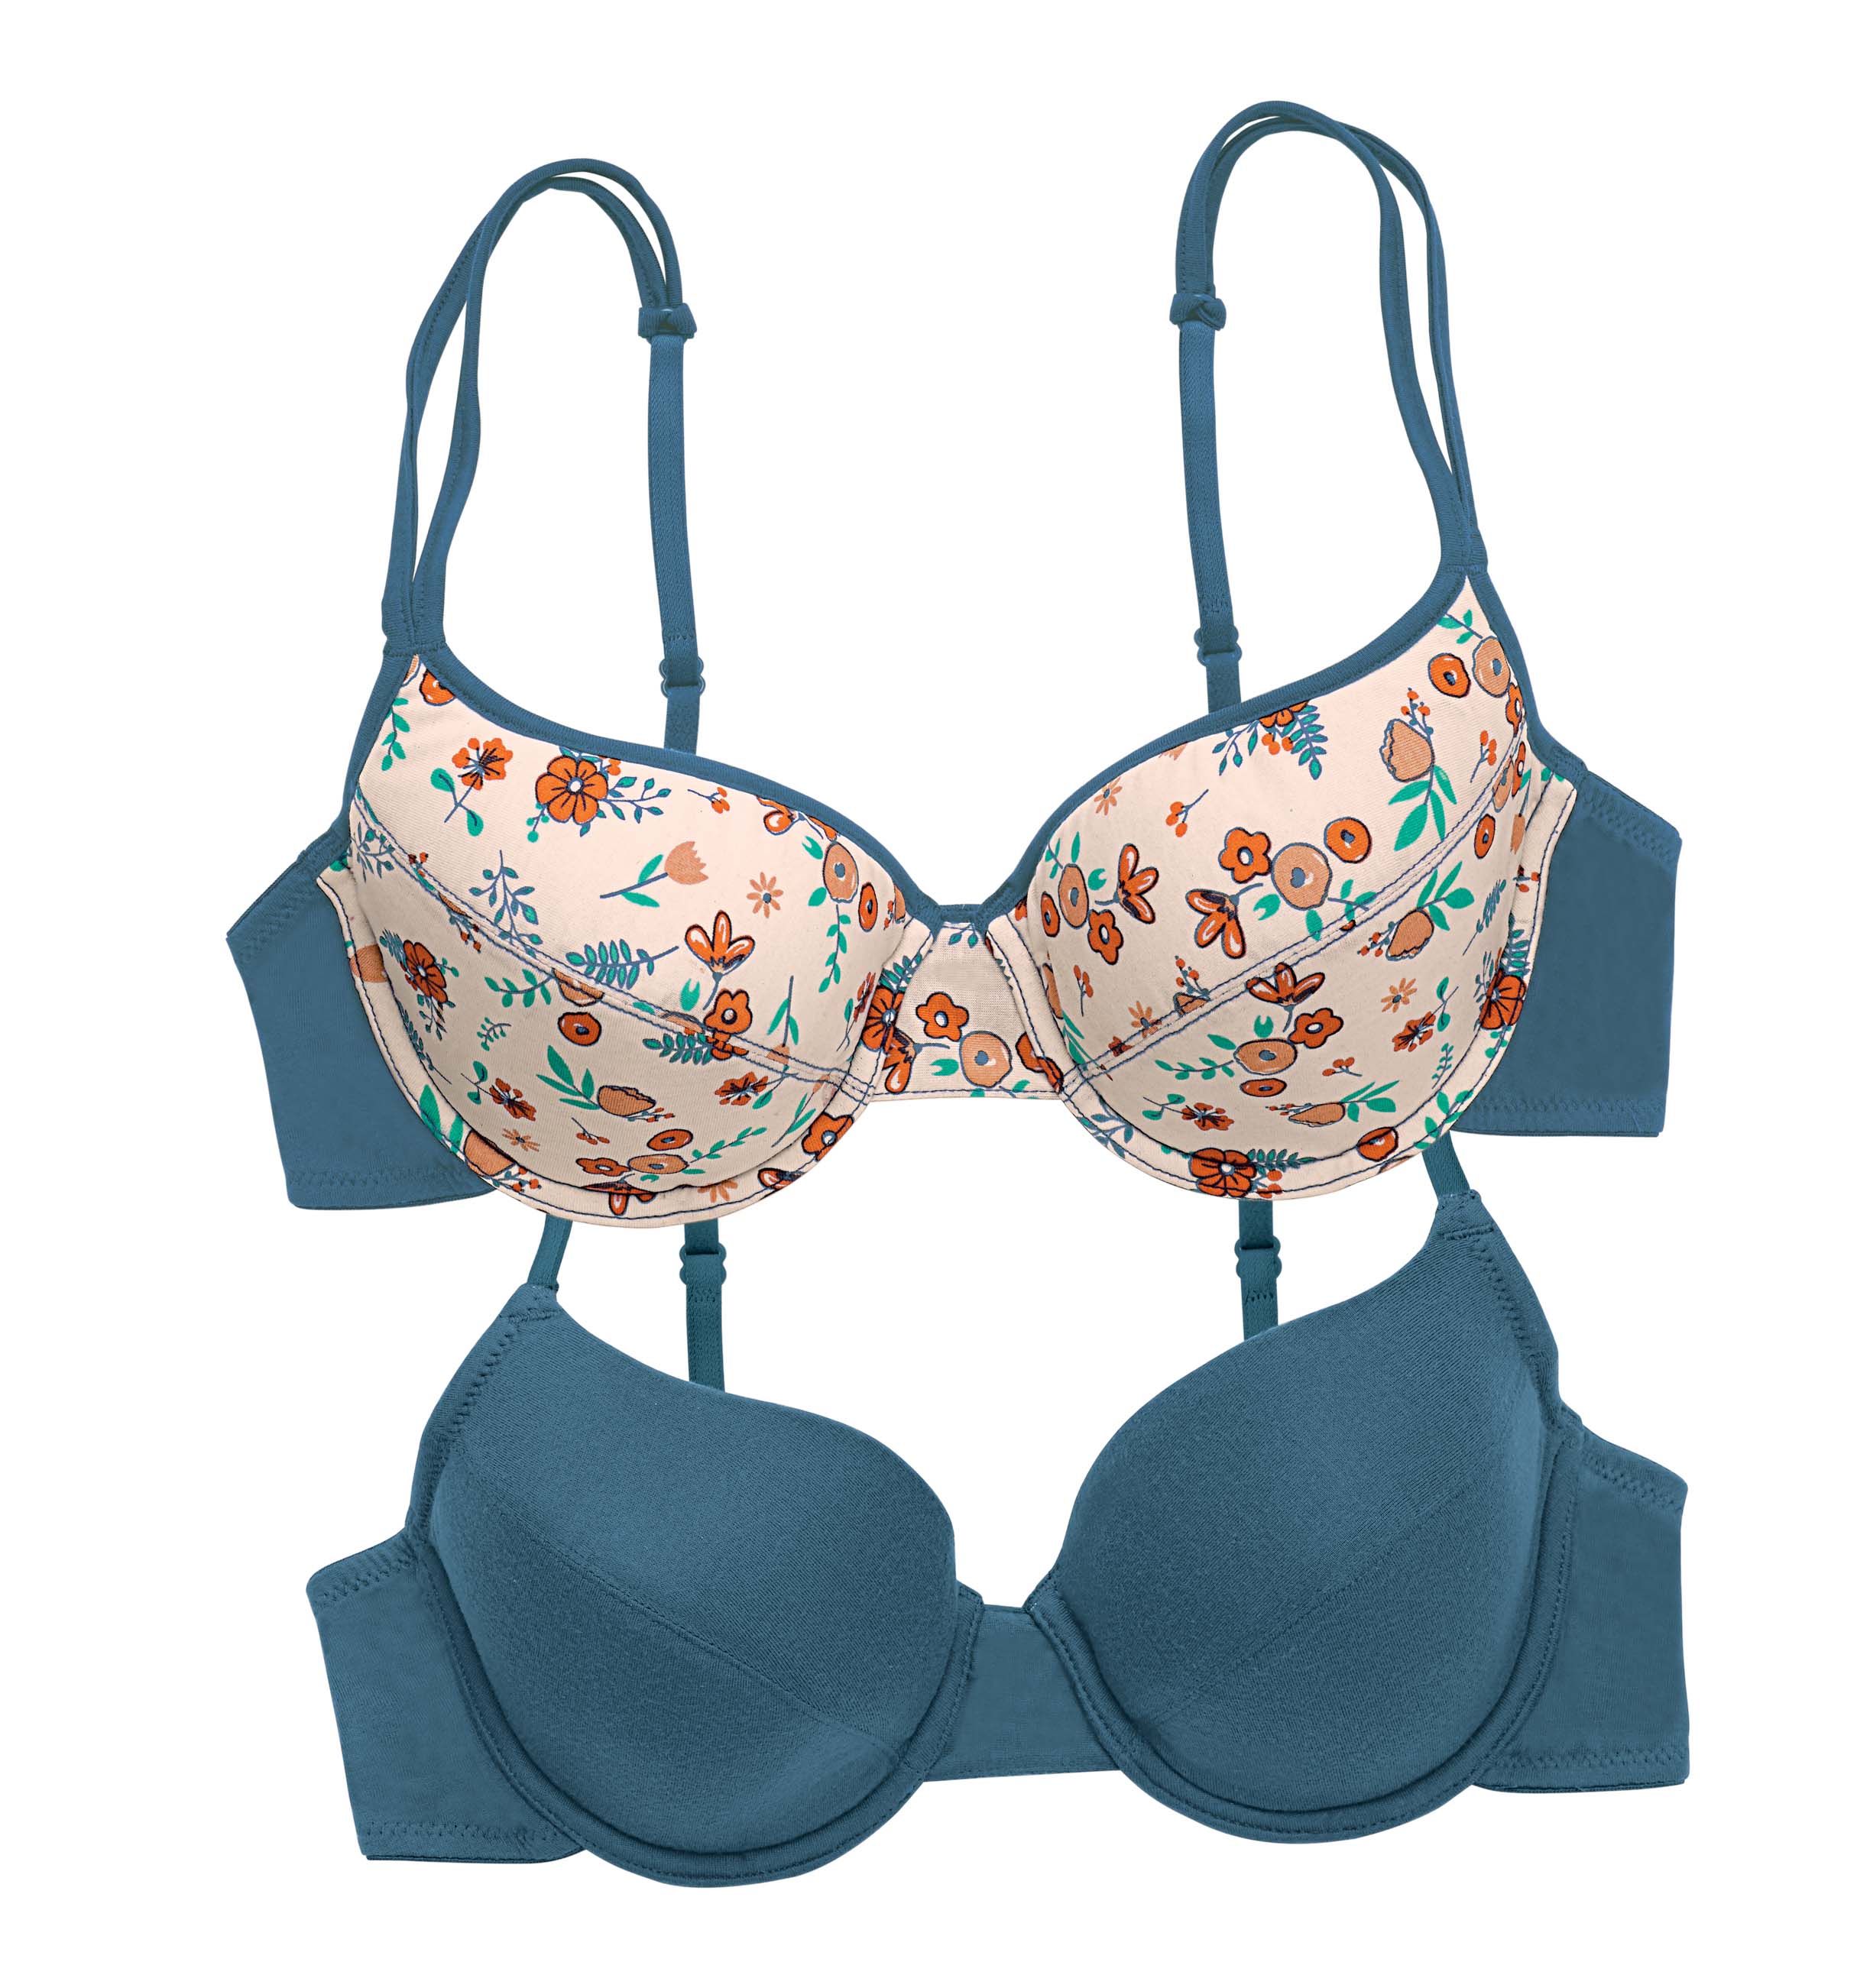 Avon Fashions Everyday Comfort Ica Non-Wire Soft Cup Bra is going